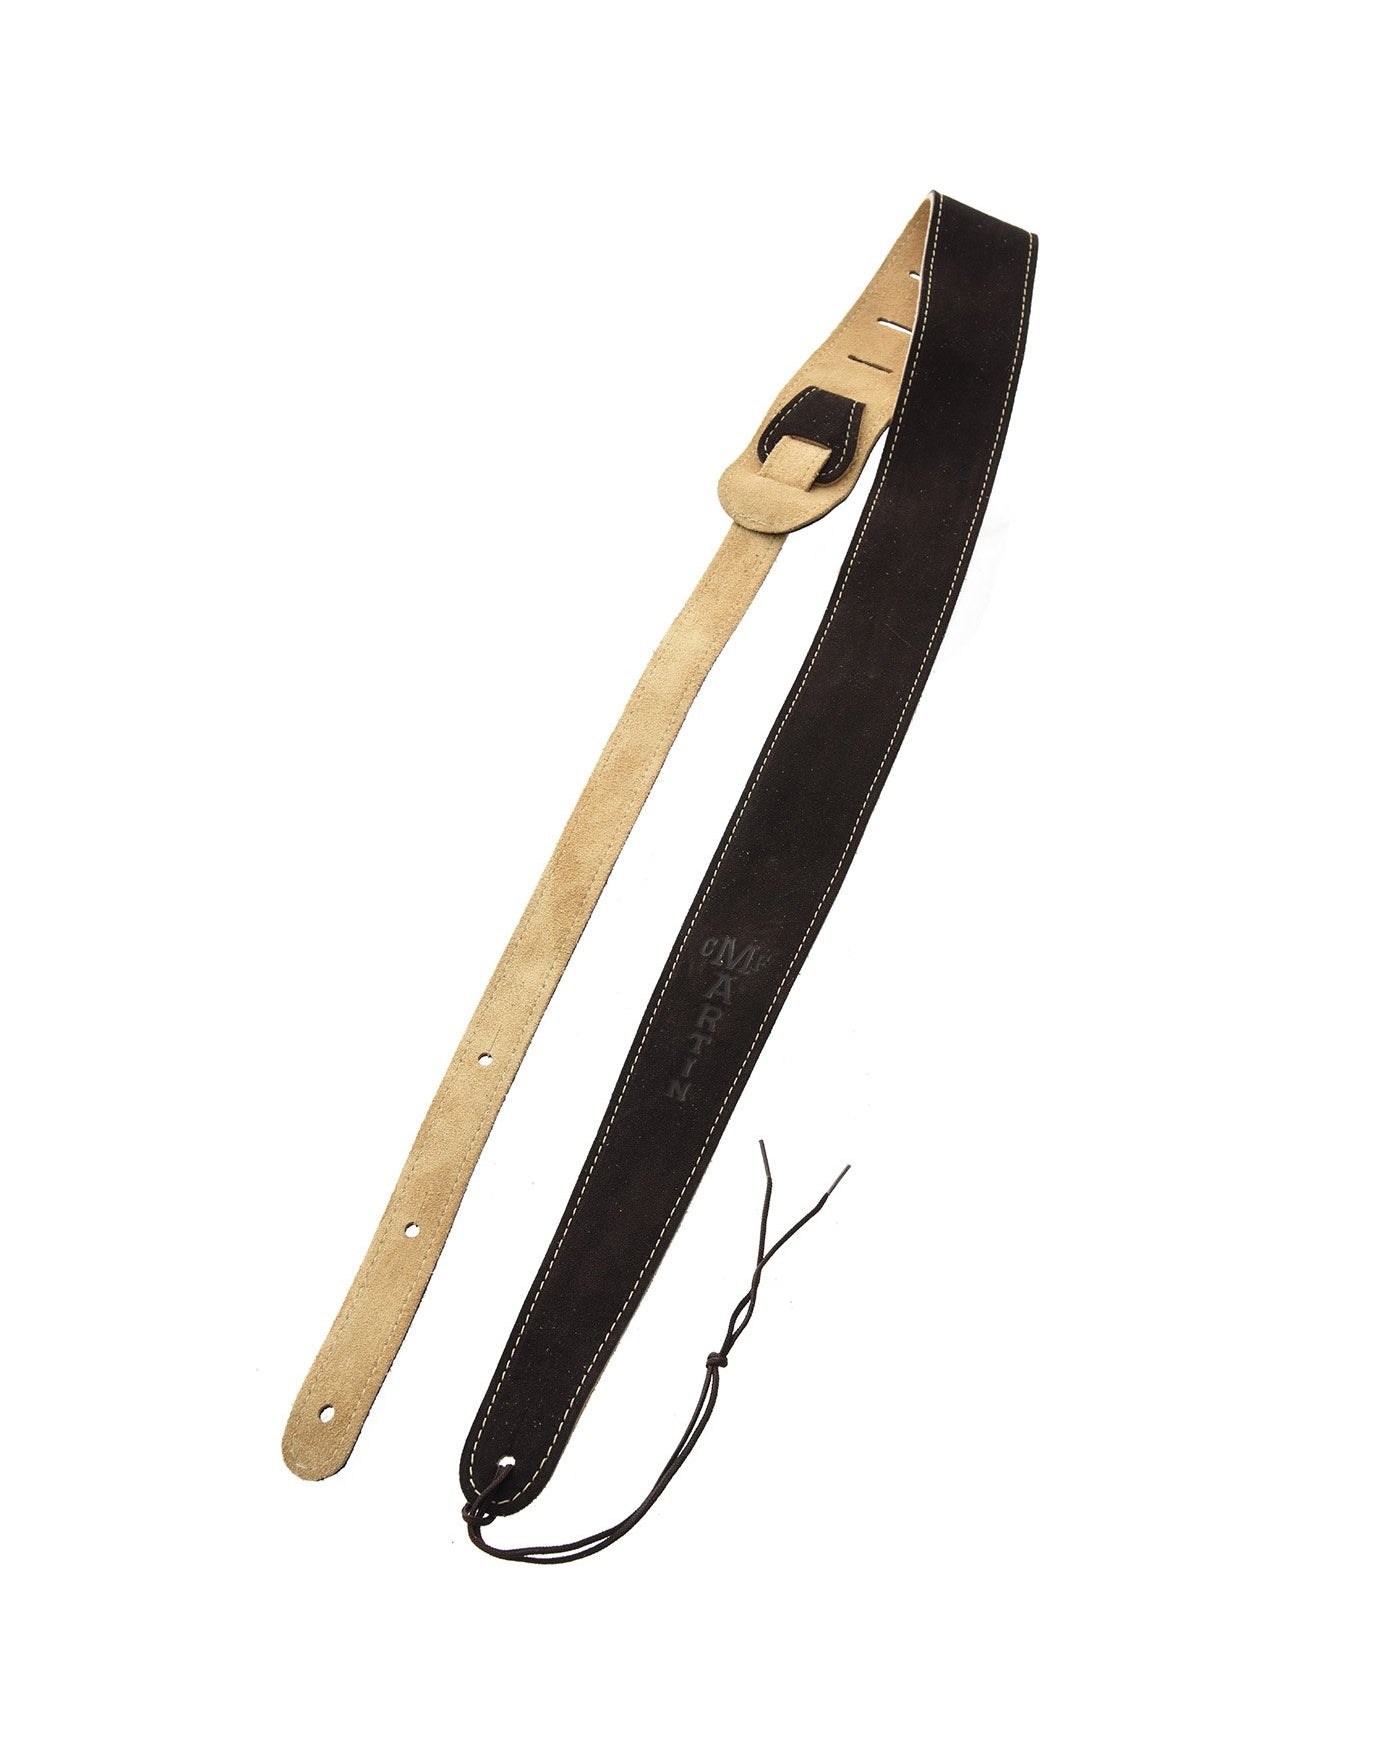 Image 1 of Martin Suede Guitar Strap, Brown - SKU# MSTP17 : Product Type Accessories & Parts : Elderly Instruments